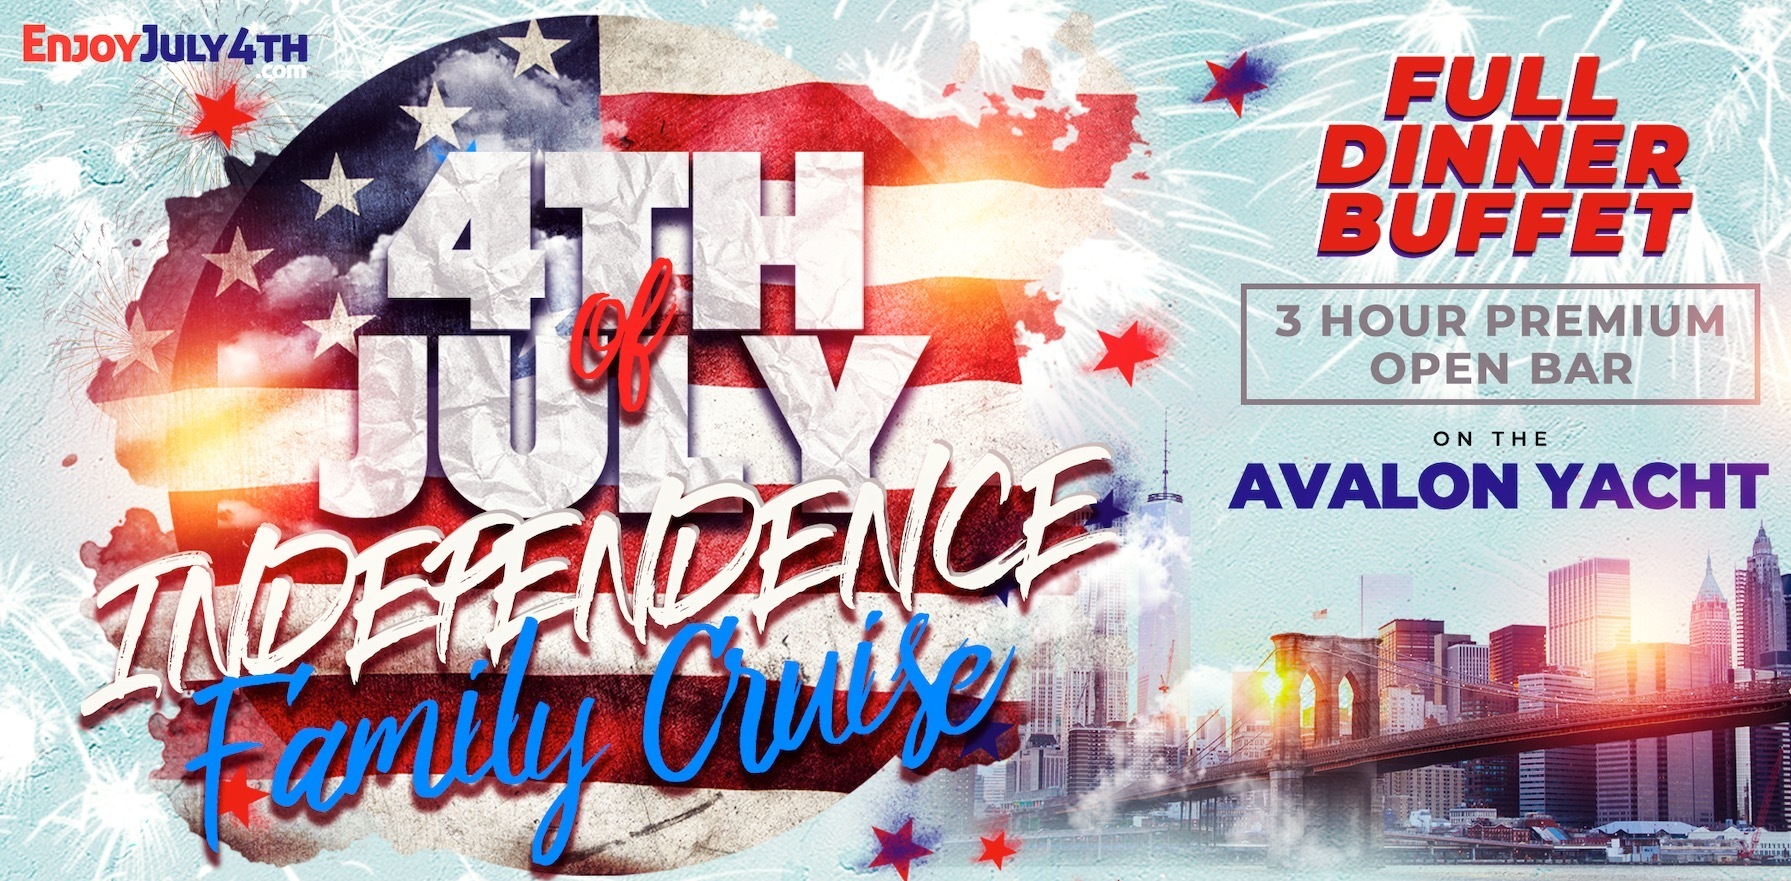 July 4th Independence Day Family Fireworks Cruise NYC aboard the Avalon Yacht - Tuesday July 4, 2023, New York, United States